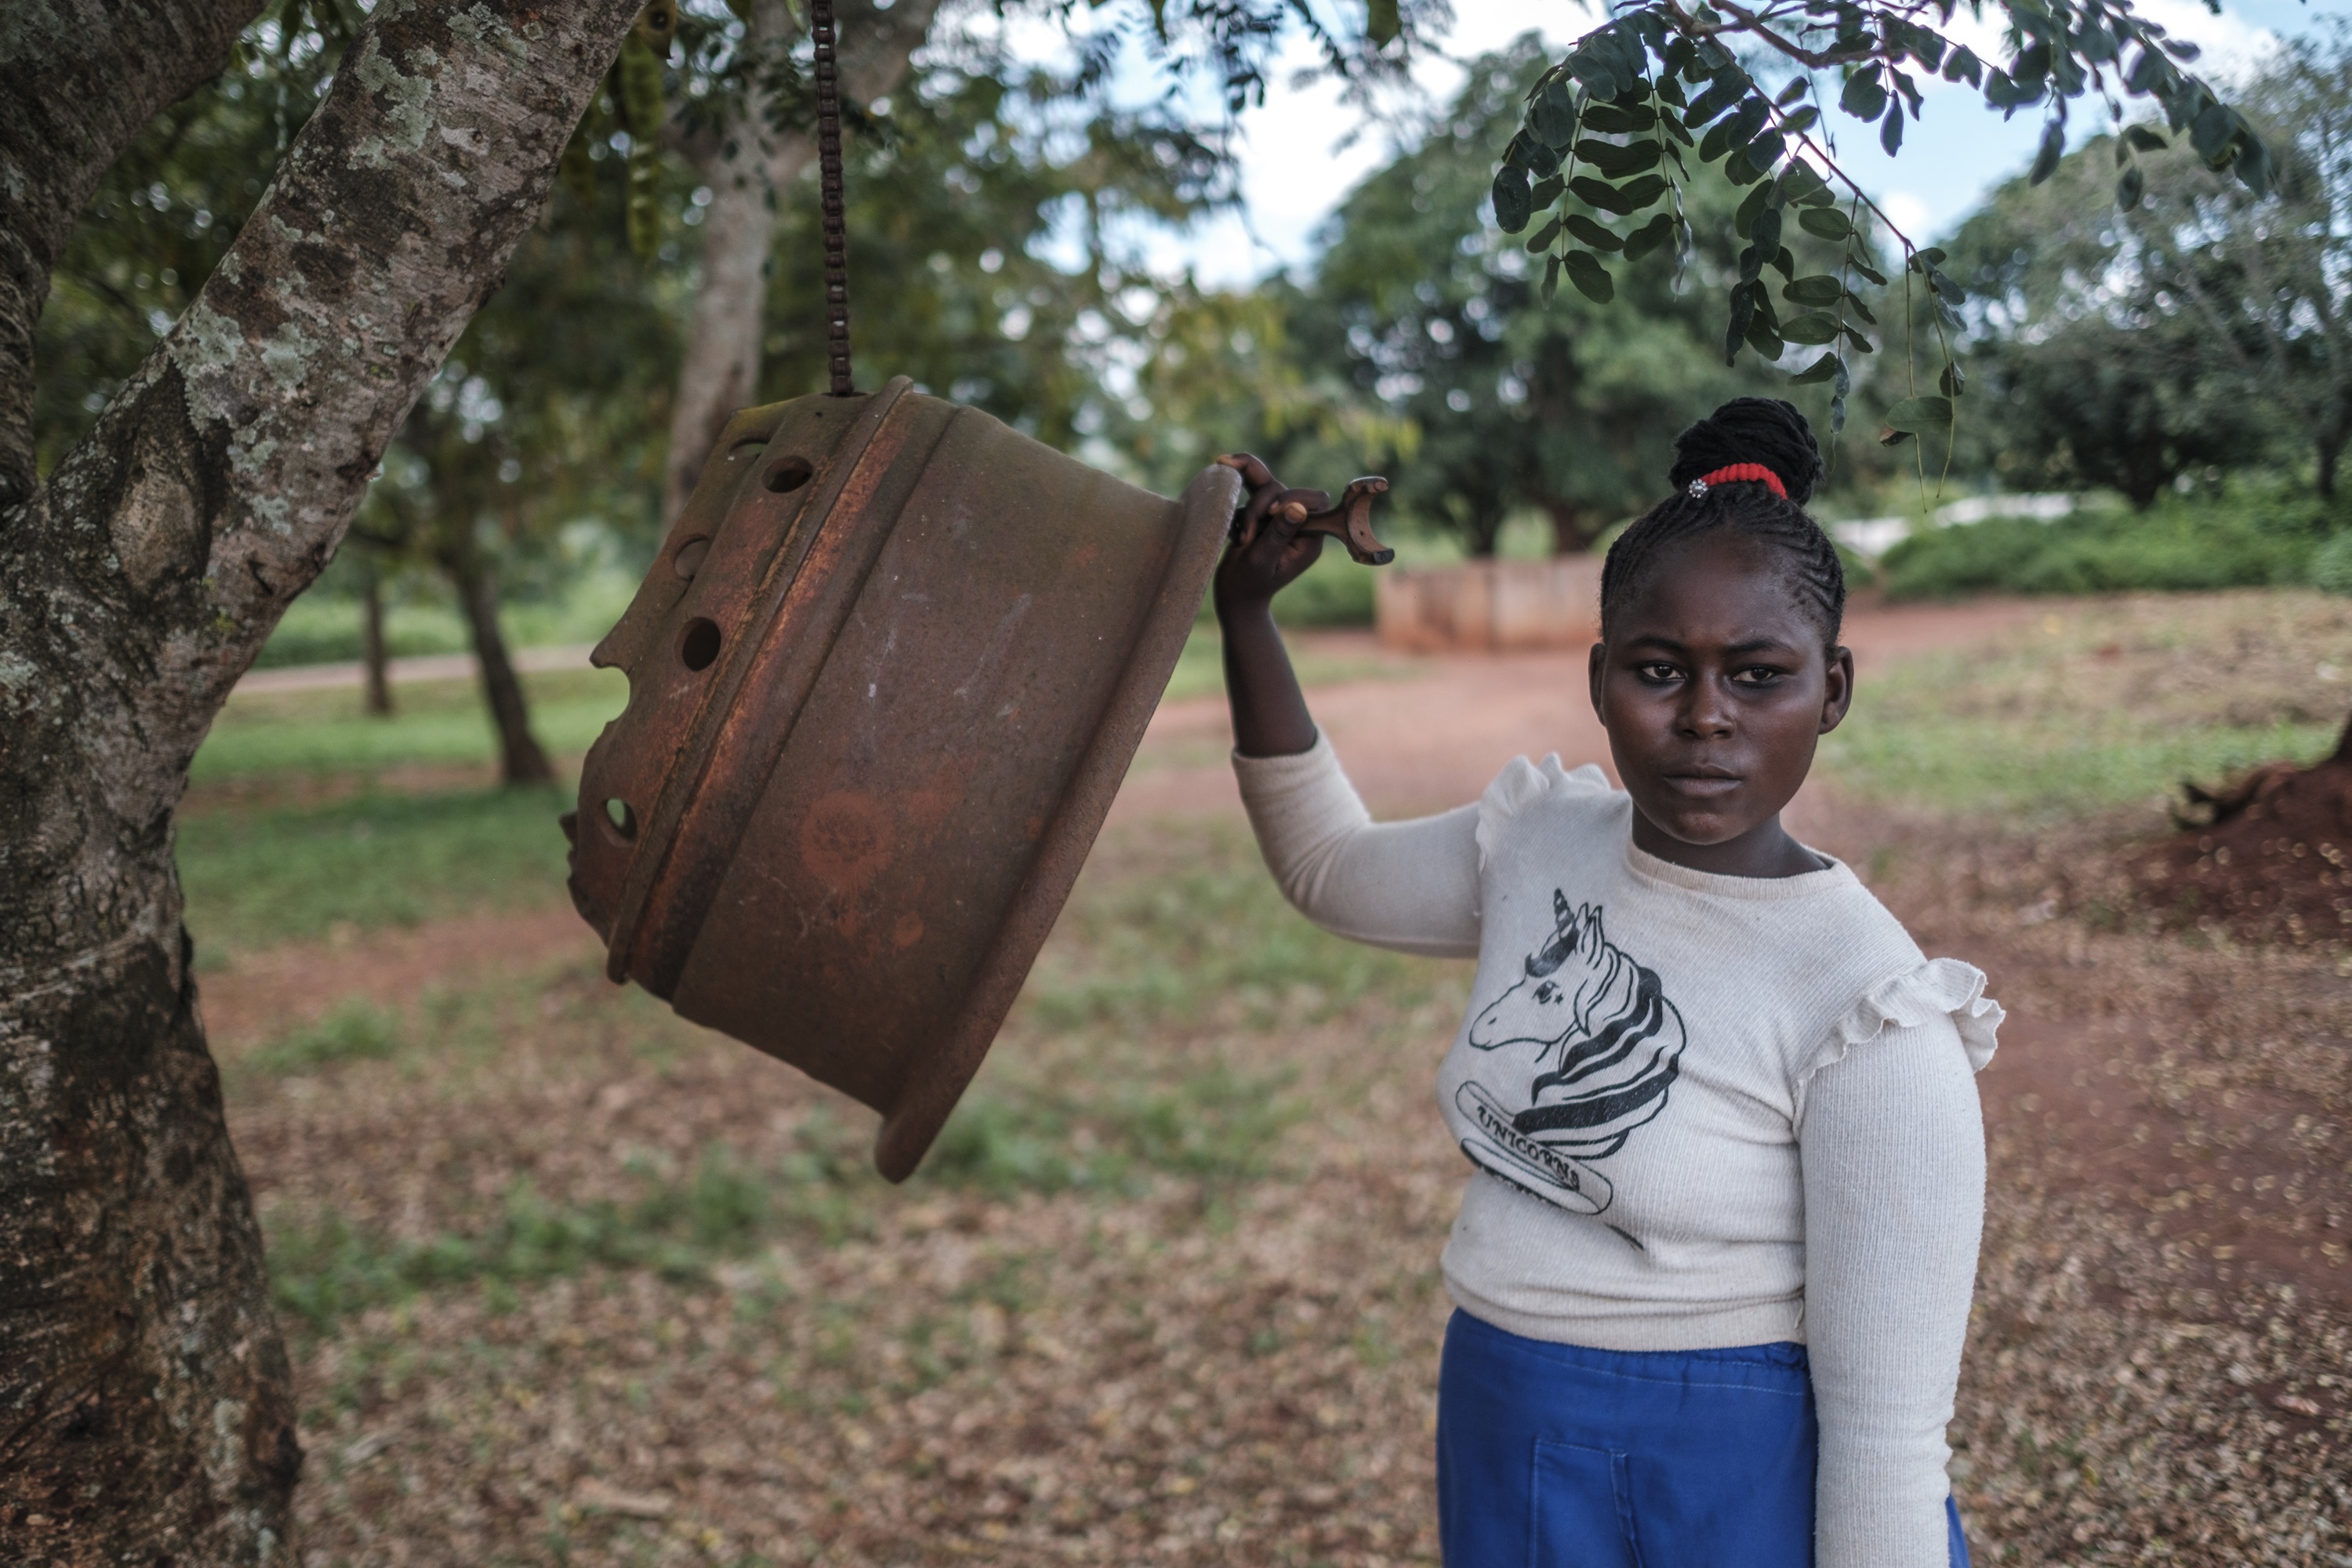 Student Naomi Bakeré rings a metal bell at break time at the Boyali 2 school, in the village of Boyali, Central African Republic. (Eduardo Soteras/AP Images for Global Partnership for Education)